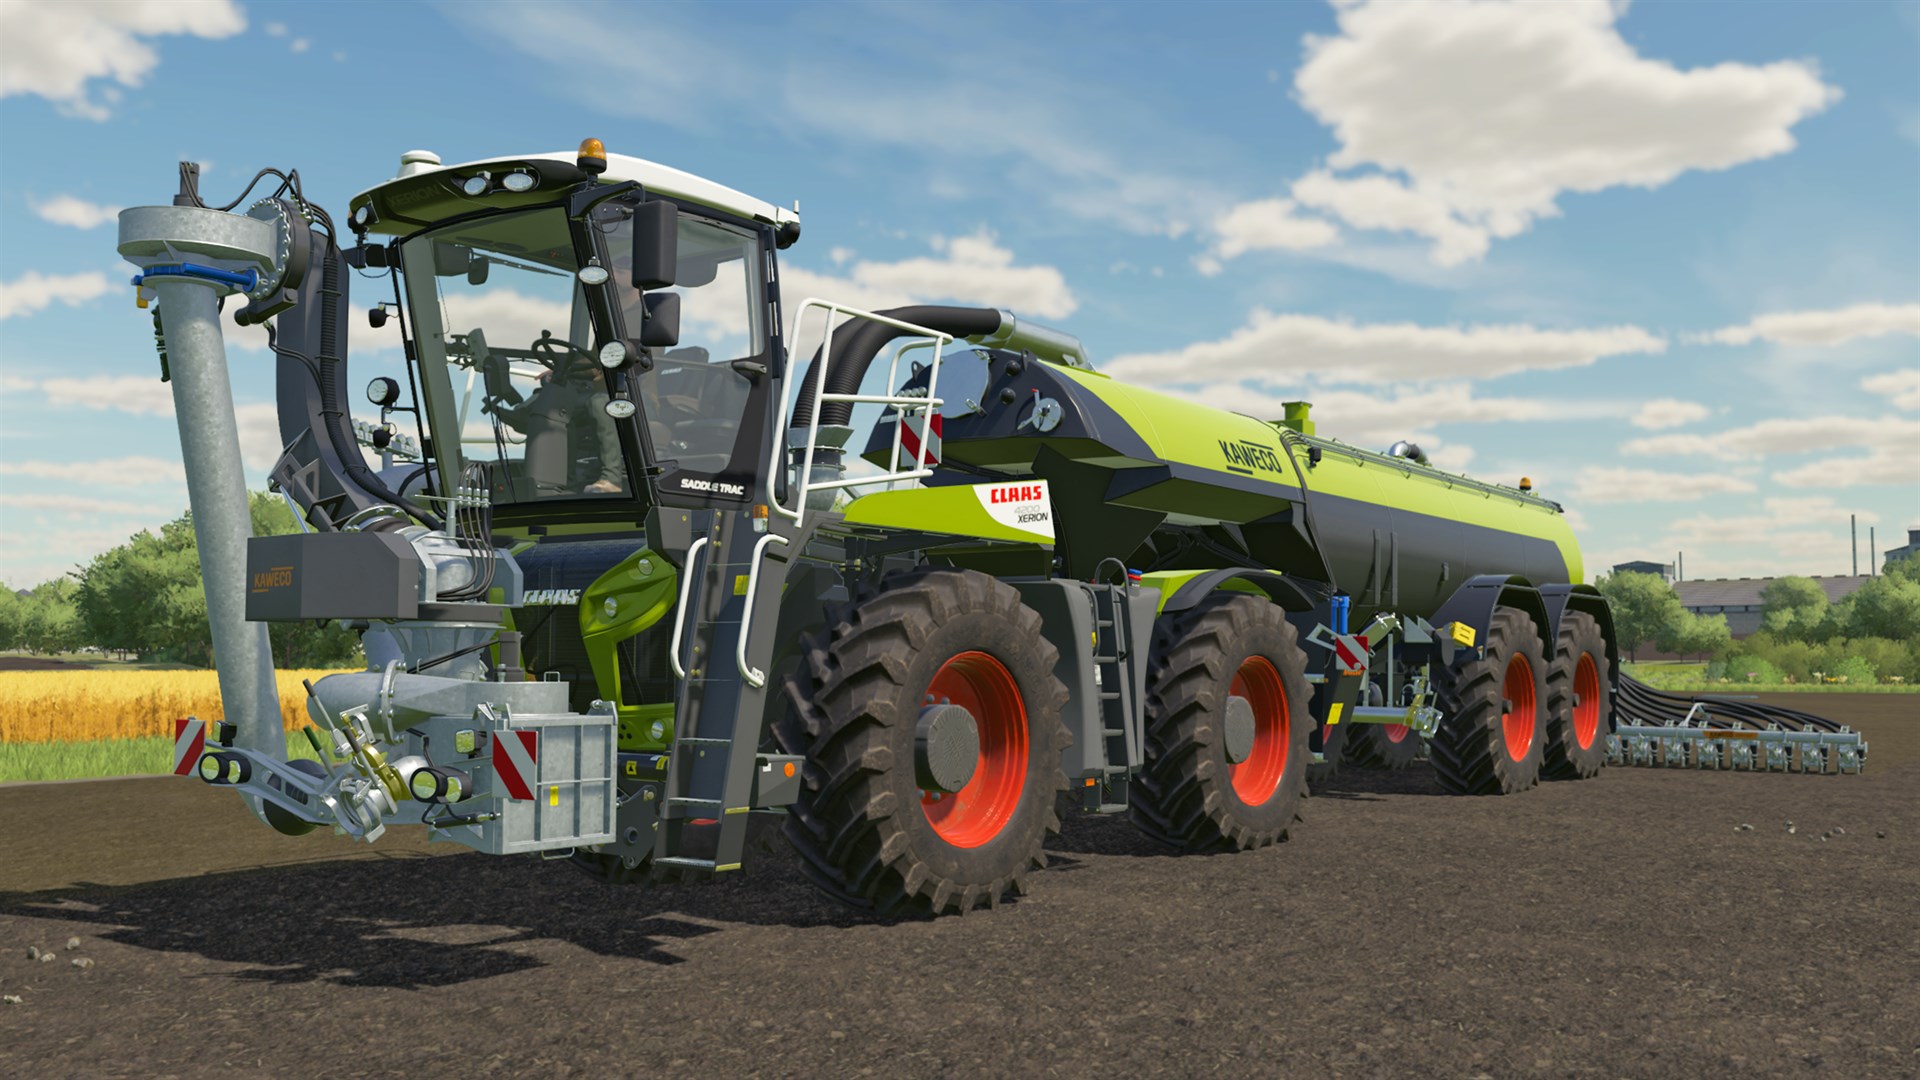 CLAAS XERION SADDLE TRAC Pack (PC)